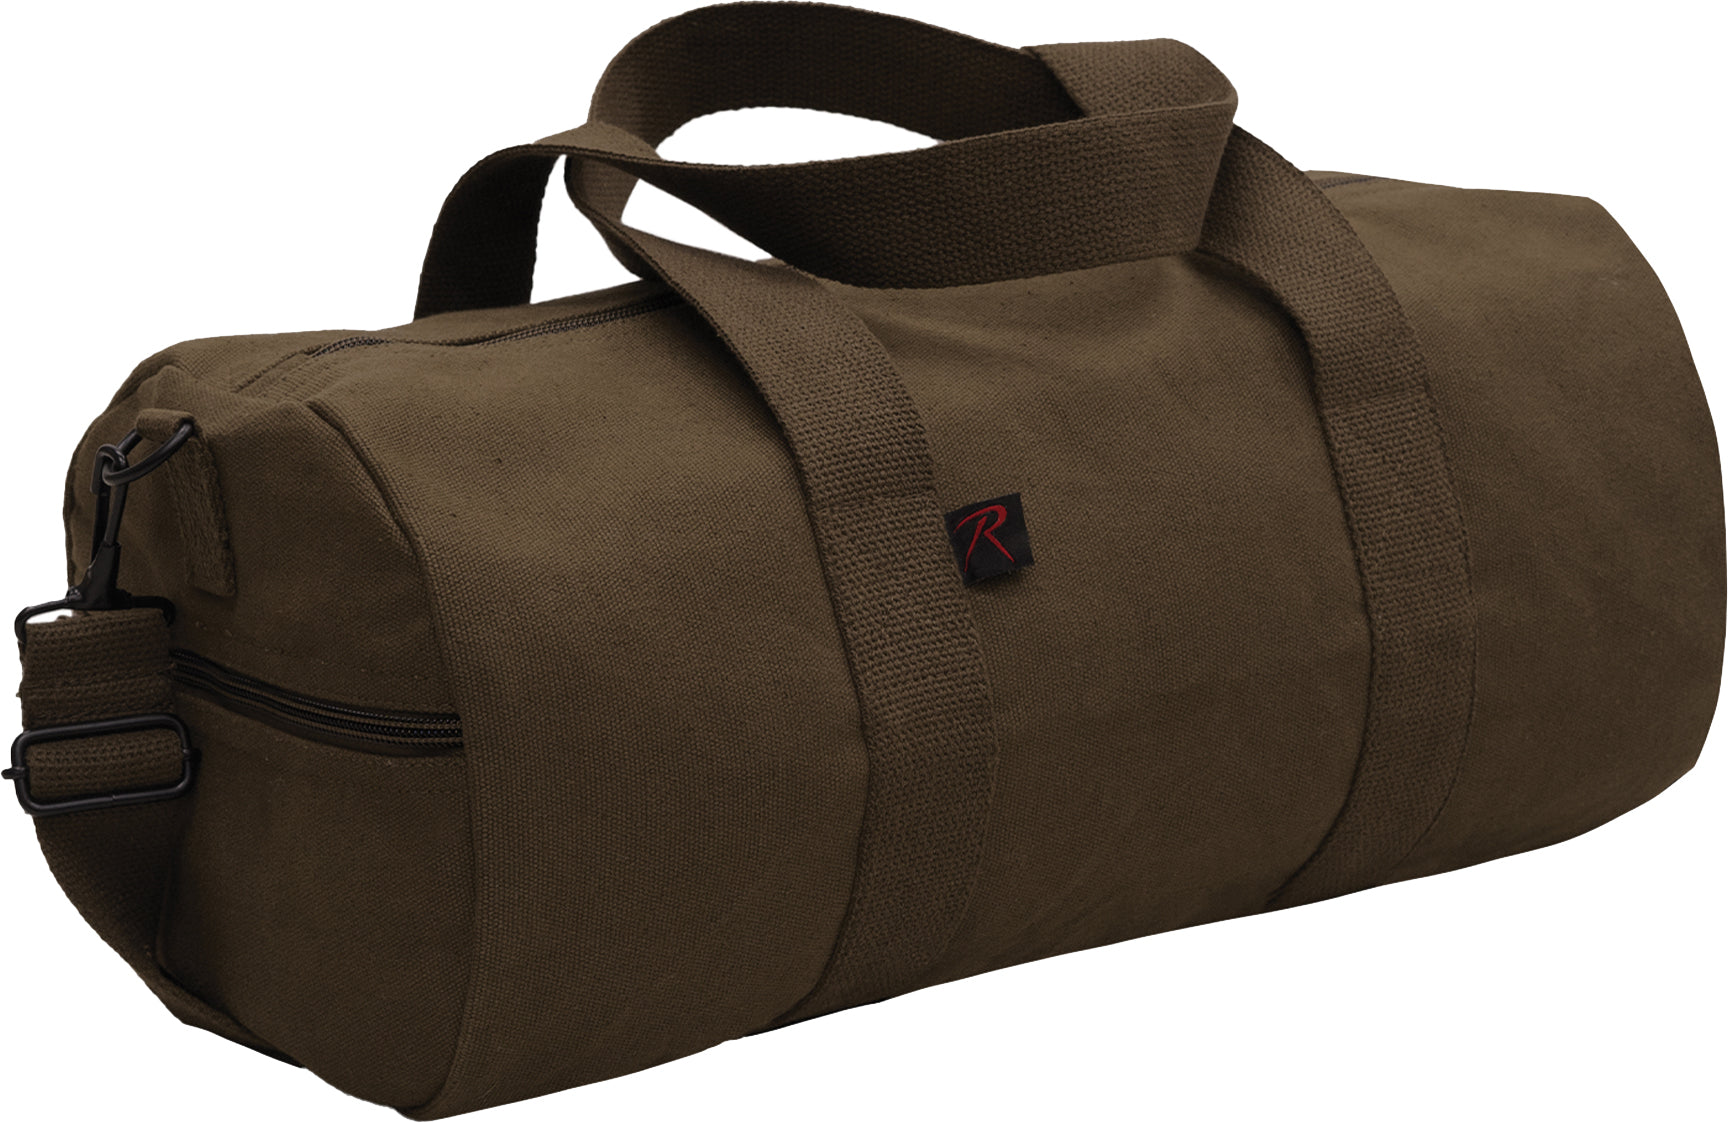 Earth Brown Heavyweight Cotton Canvas Duffle Bag Sports Gym Shoulder & Carry Bag 17